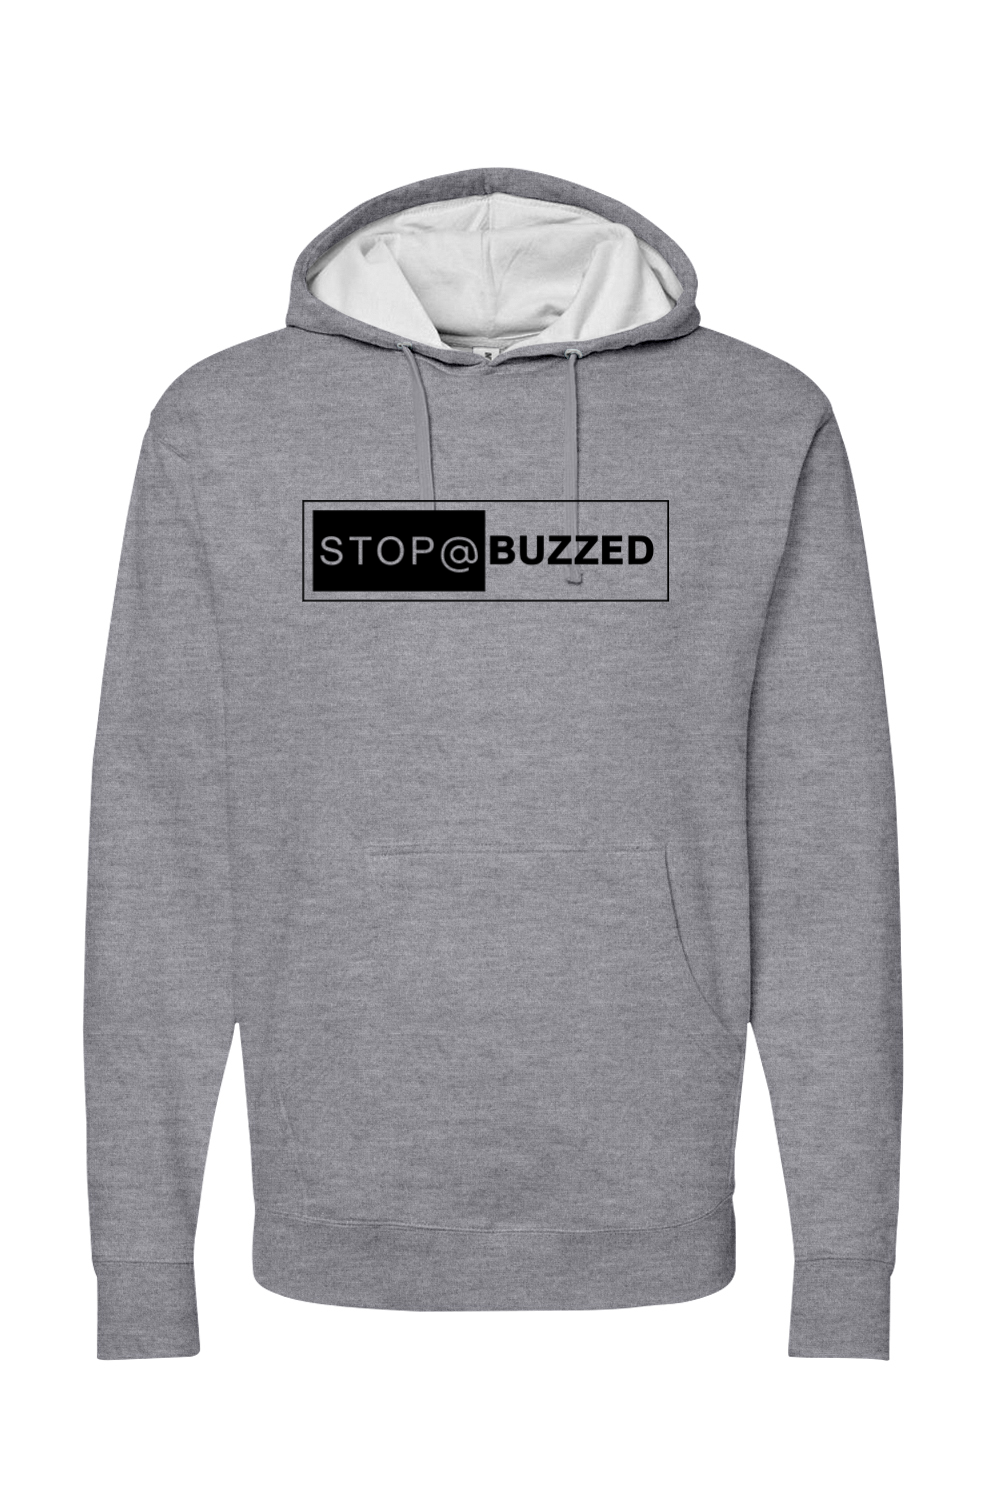 Stop @ Buzzed Independent Trading Co. Midweight Hooded Sweatshirt